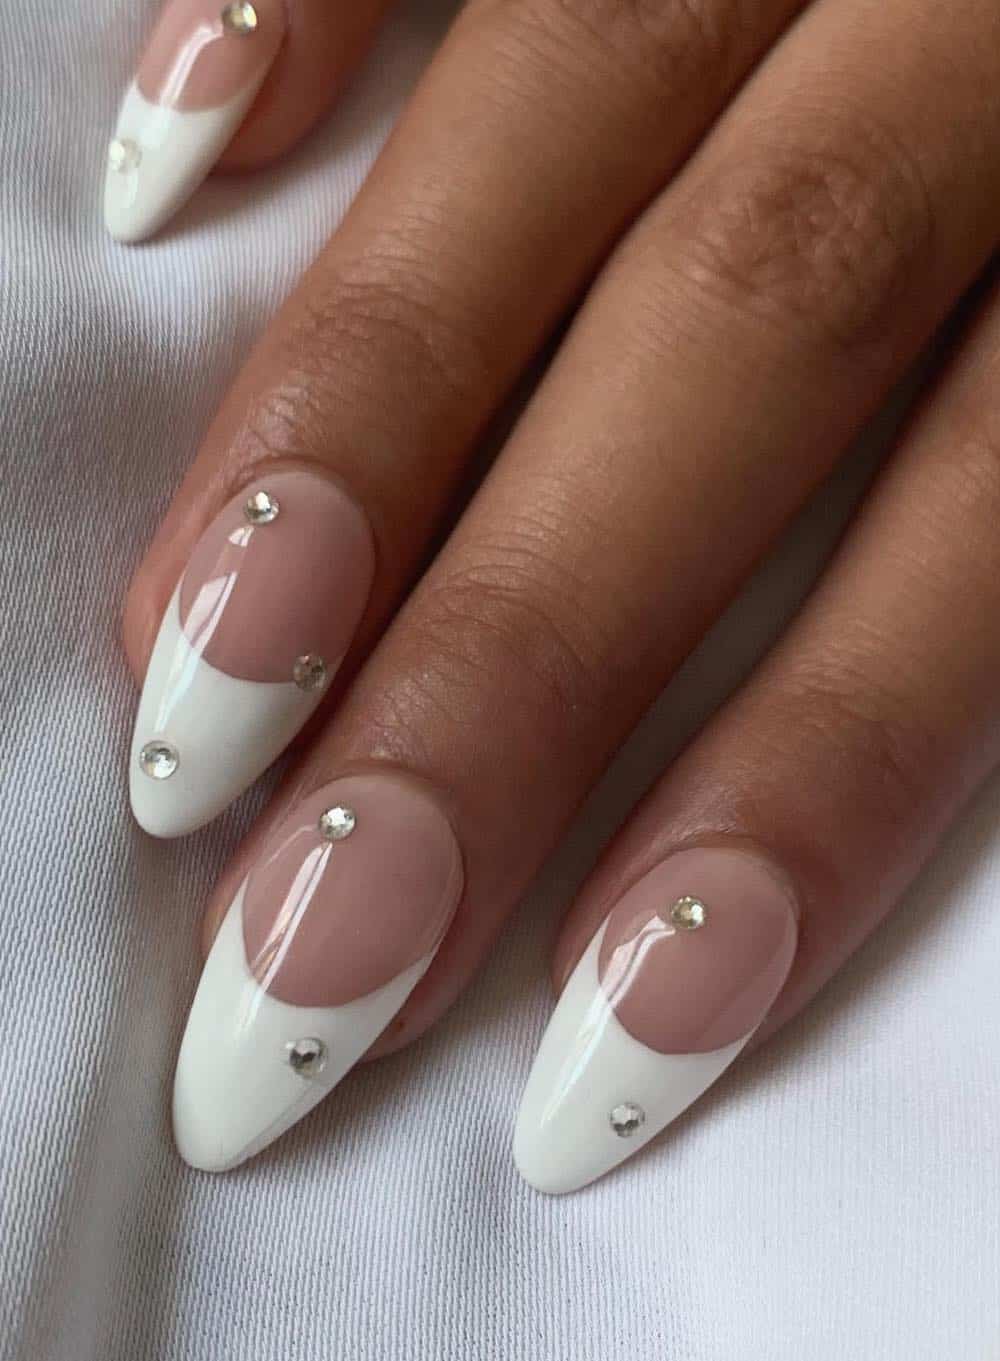 image of a hand with nude almond nails with white french tips and rhinestones